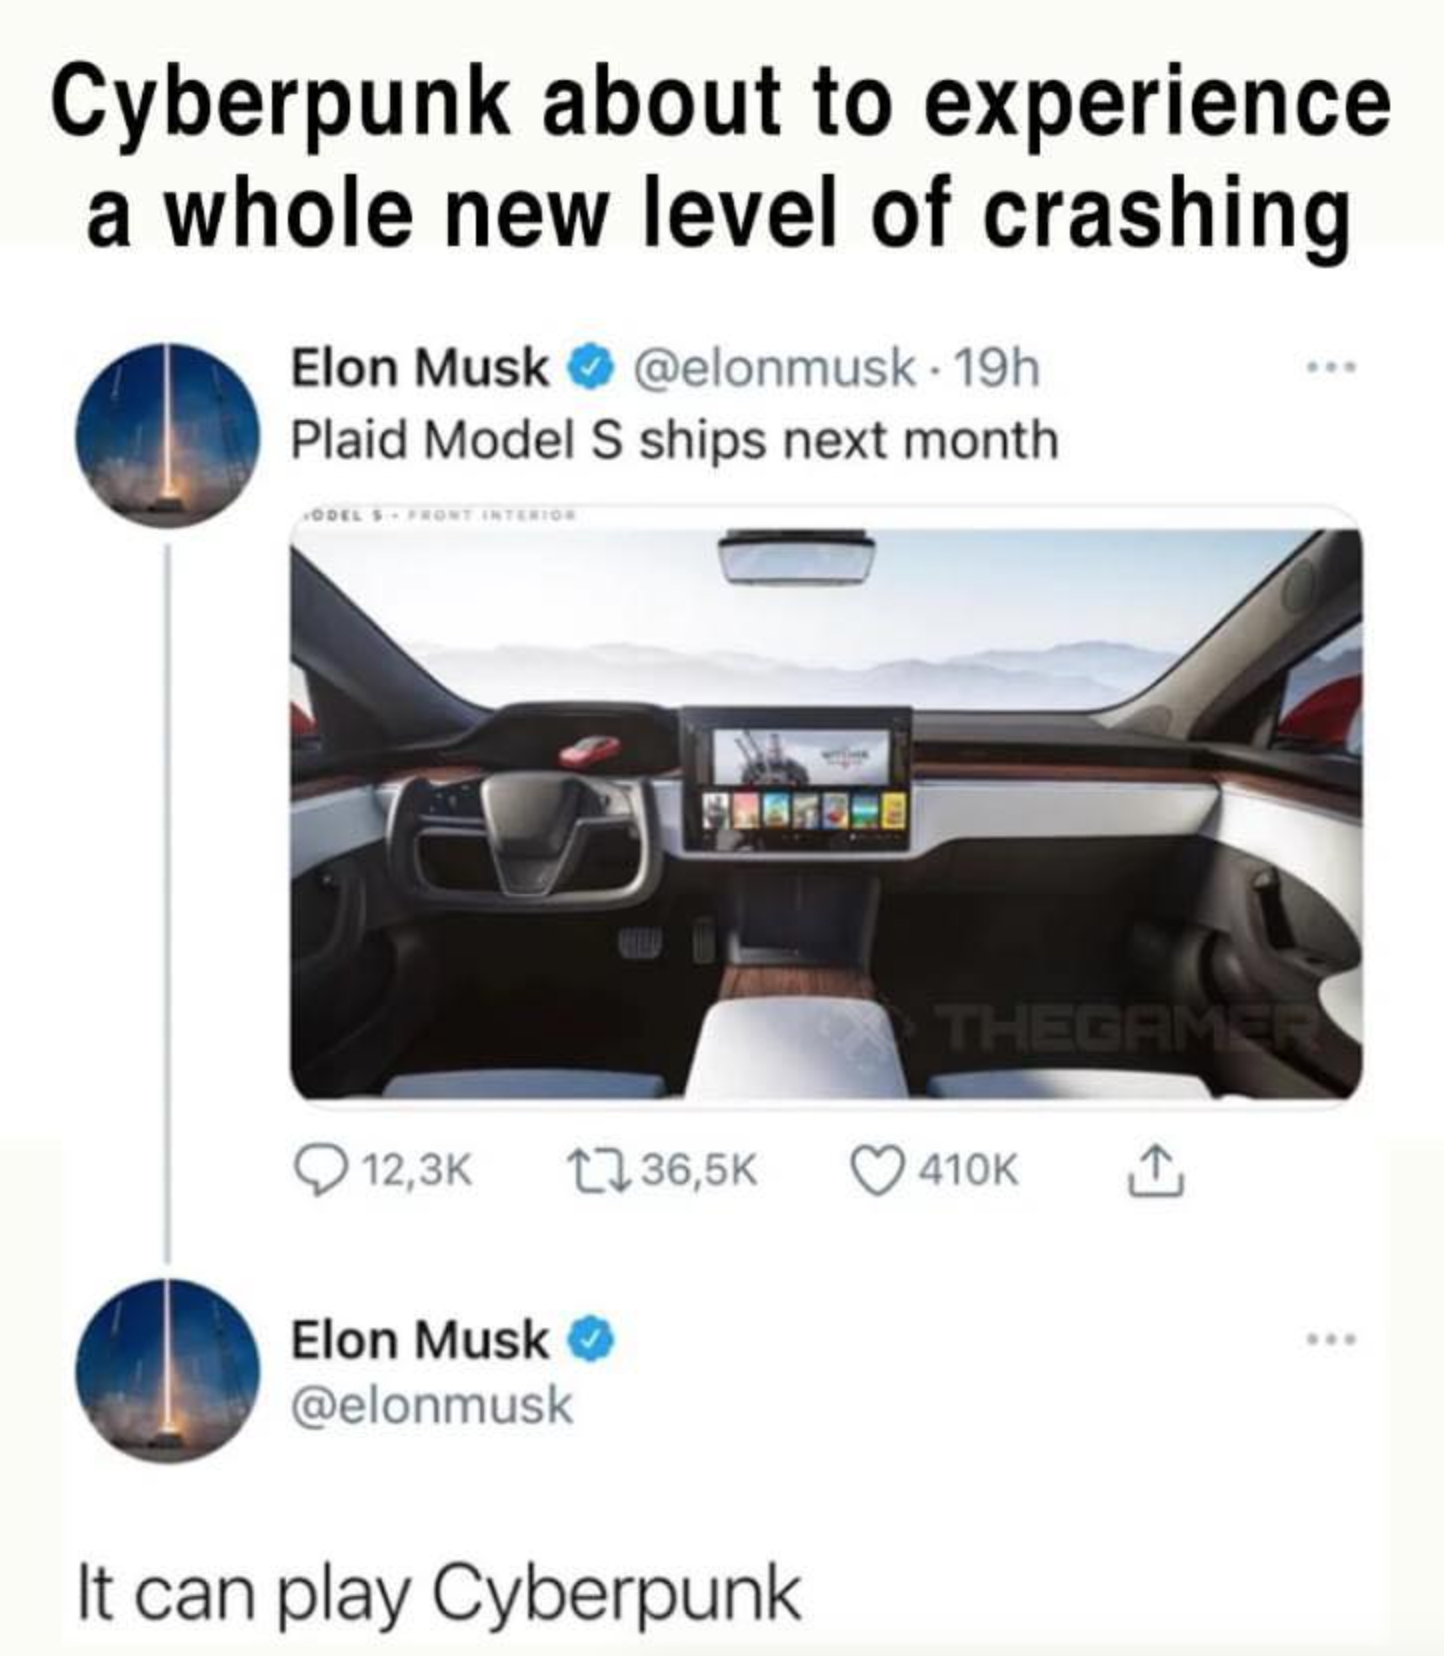 gaming memes - Elon Musk - Cyberpunk about to experience a whole new level of crashing Elon Musk . 19h Plaid Model S ships next month Thegamos Elon Musk It can play Cyberpunk